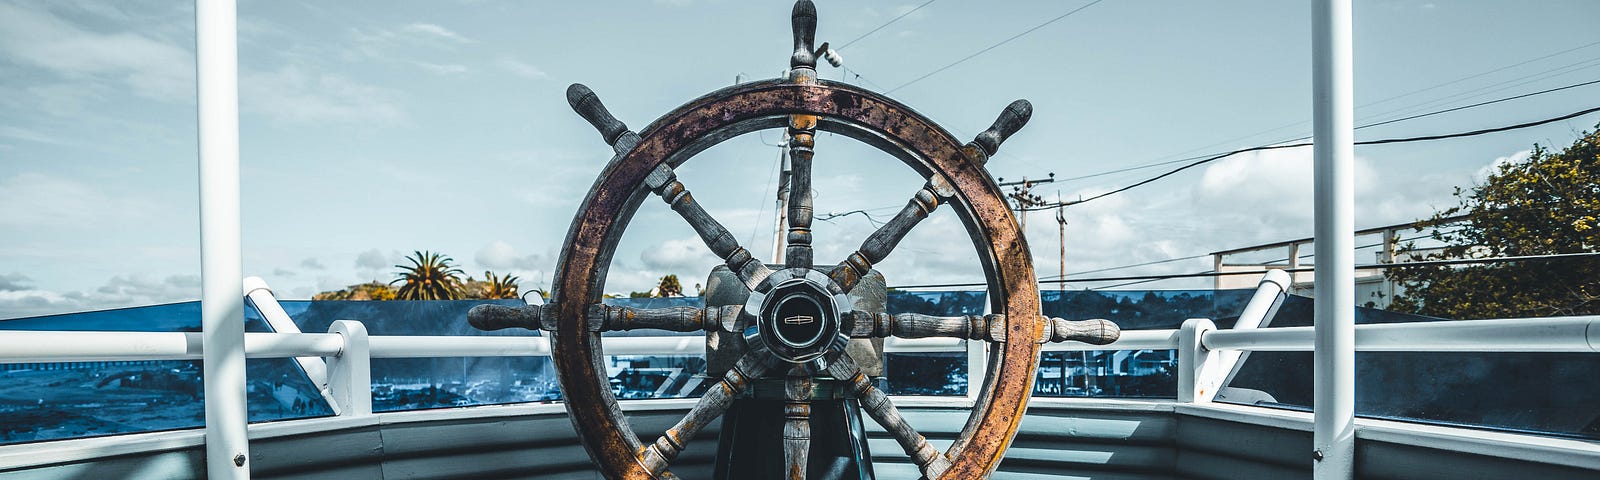 A ship’s wheel stands vacant on a vessel, waiting for guidance of a navigator.